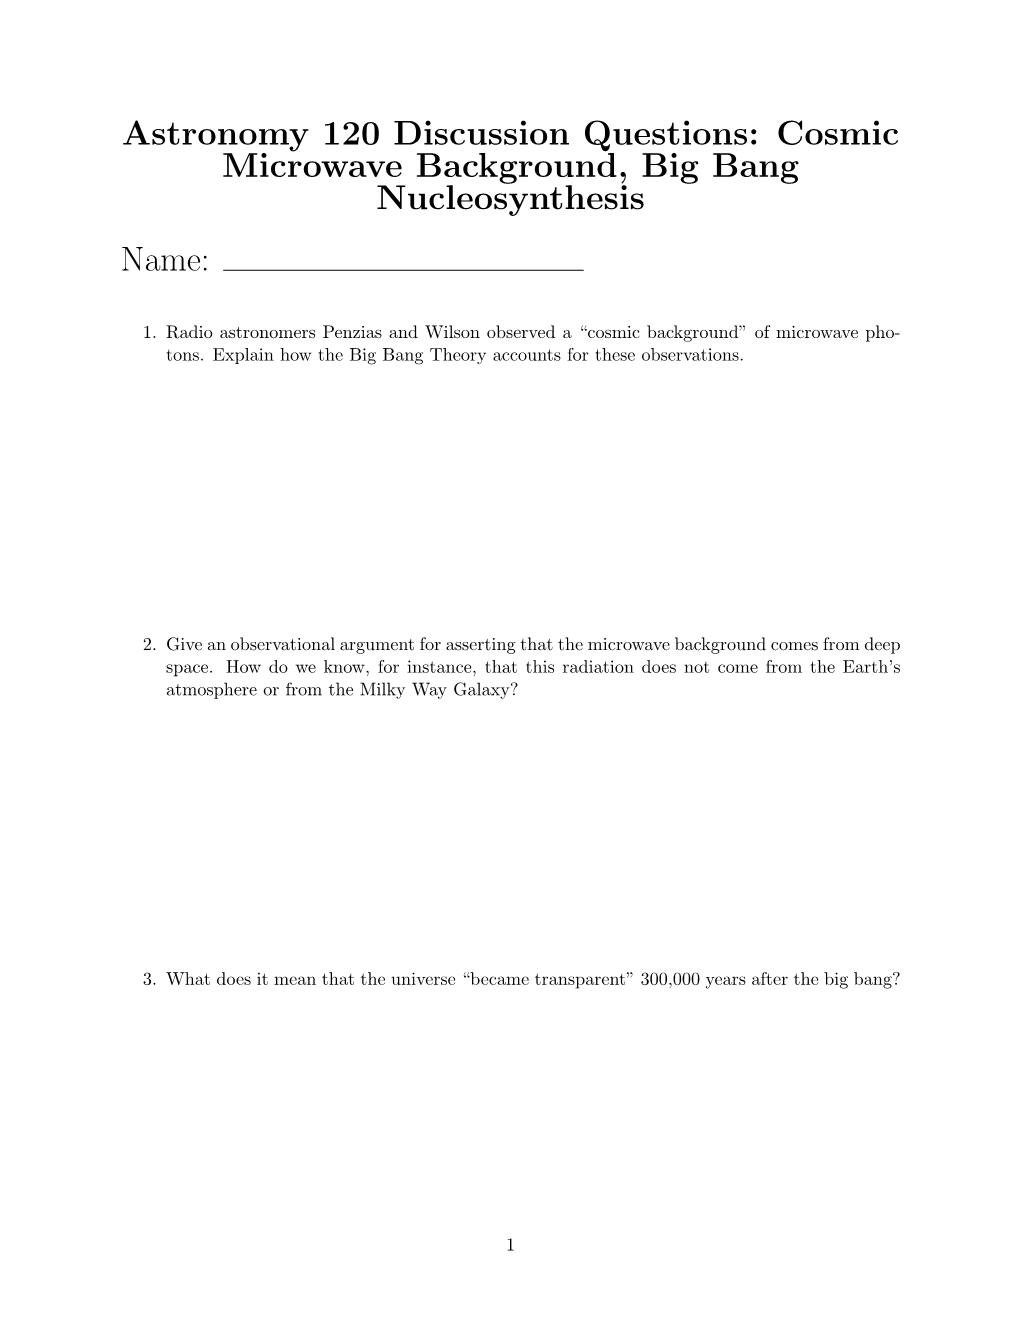 Cosmic Microwave Background, Big Bang Nucleosynthesis Name